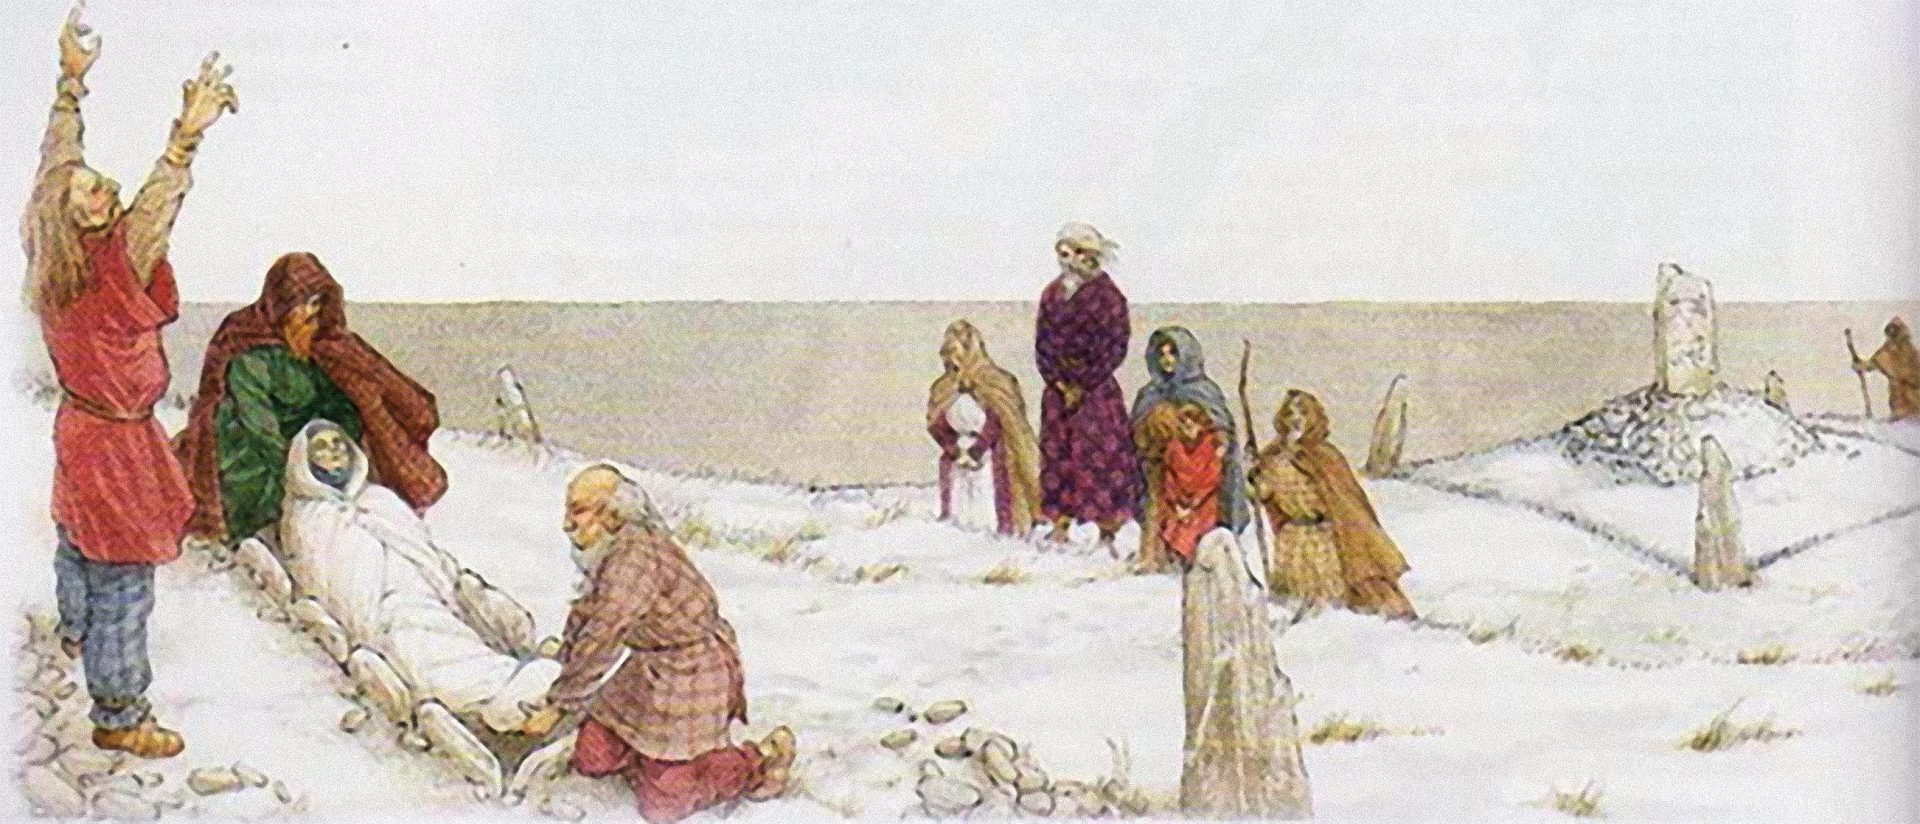 A scene of Pictish people mourning at a gravesite around a dead body covered in white cloth. One man extends his hand into the sky, possibly praying, two other men lower the body into the grave. A family is observing this burial from a distance.